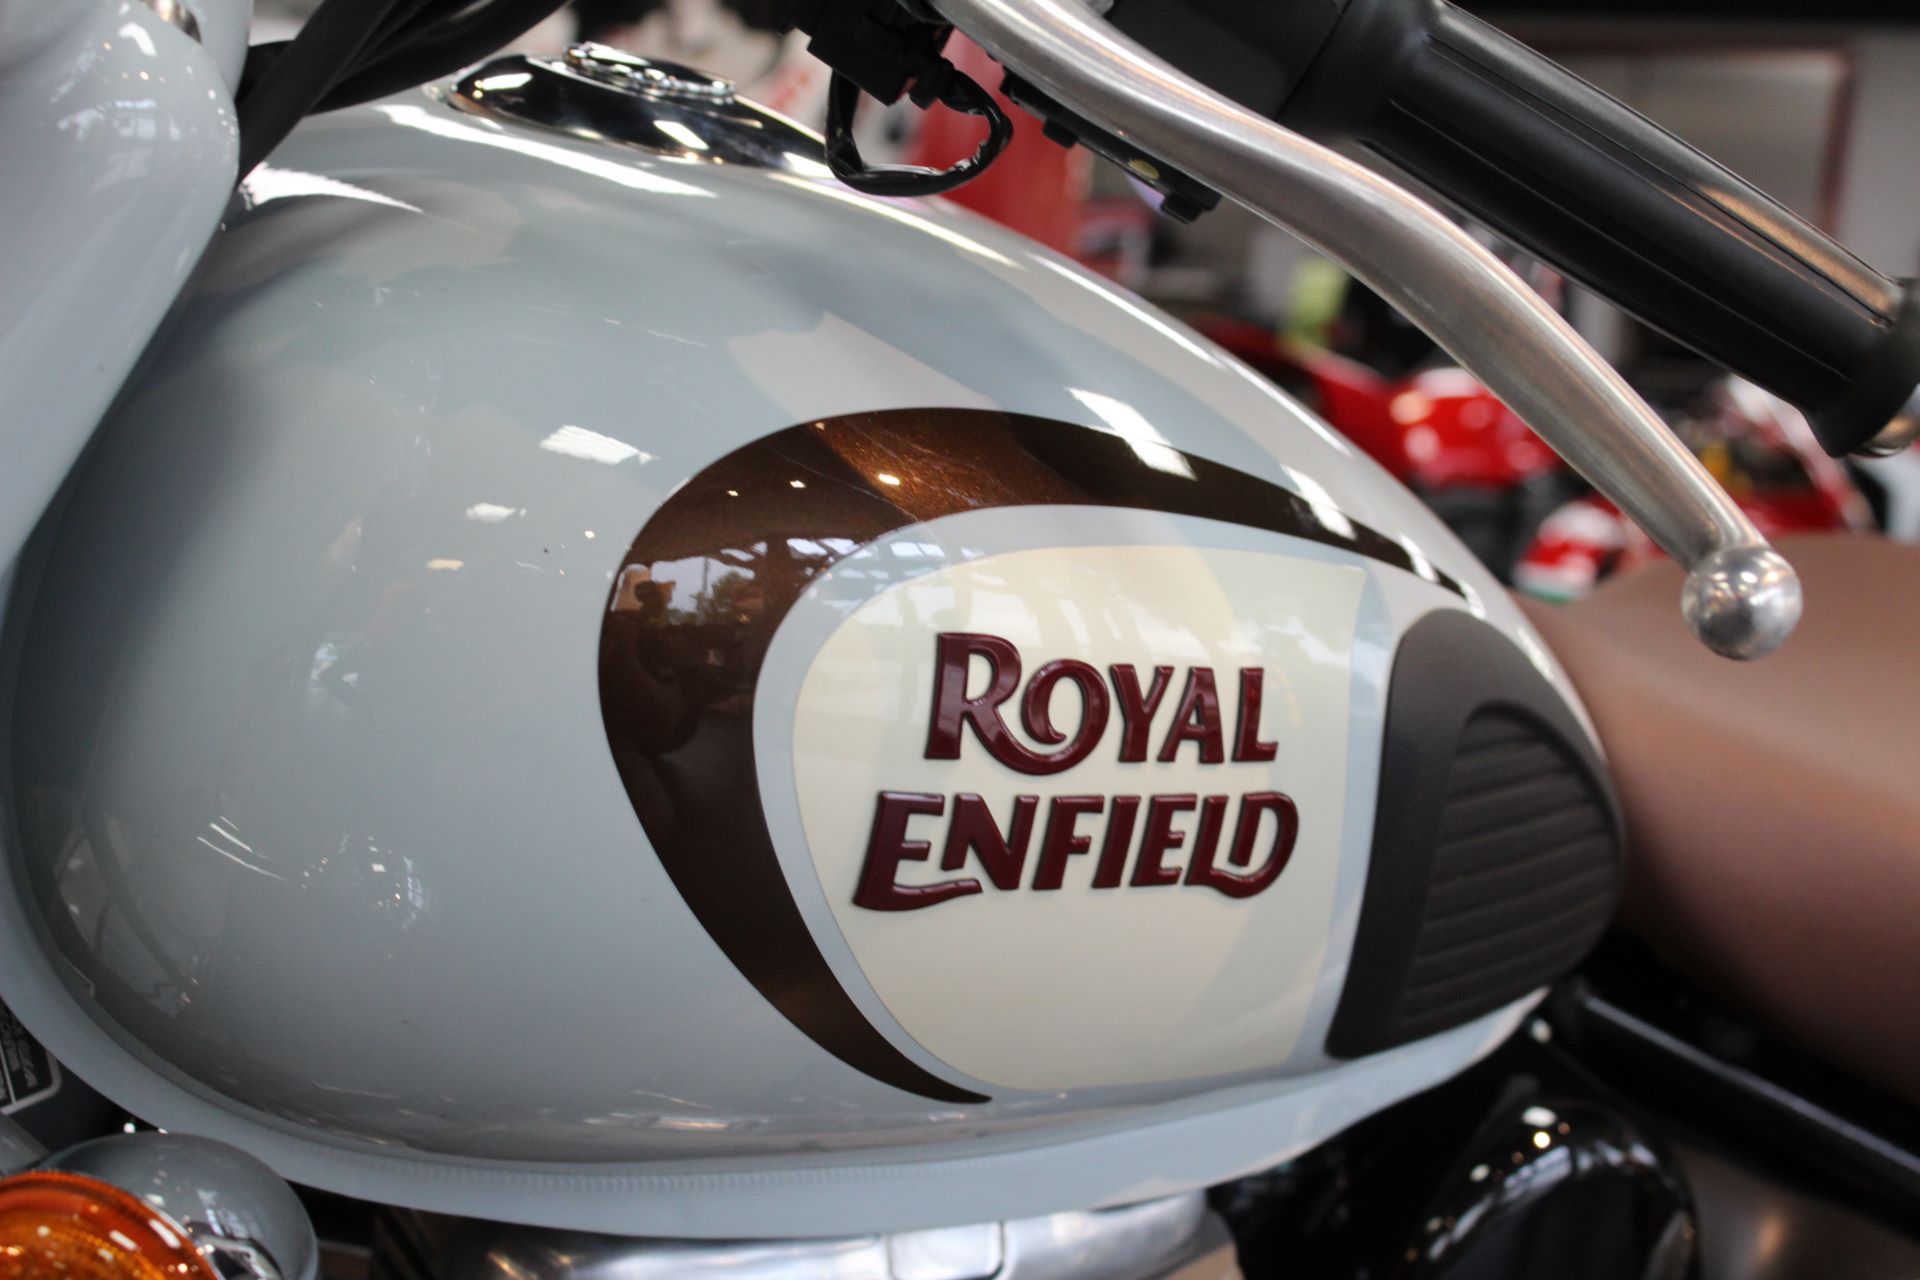 2022 Royal Enfield Classic 350 in West Allis, Wisconsin - Photo 14